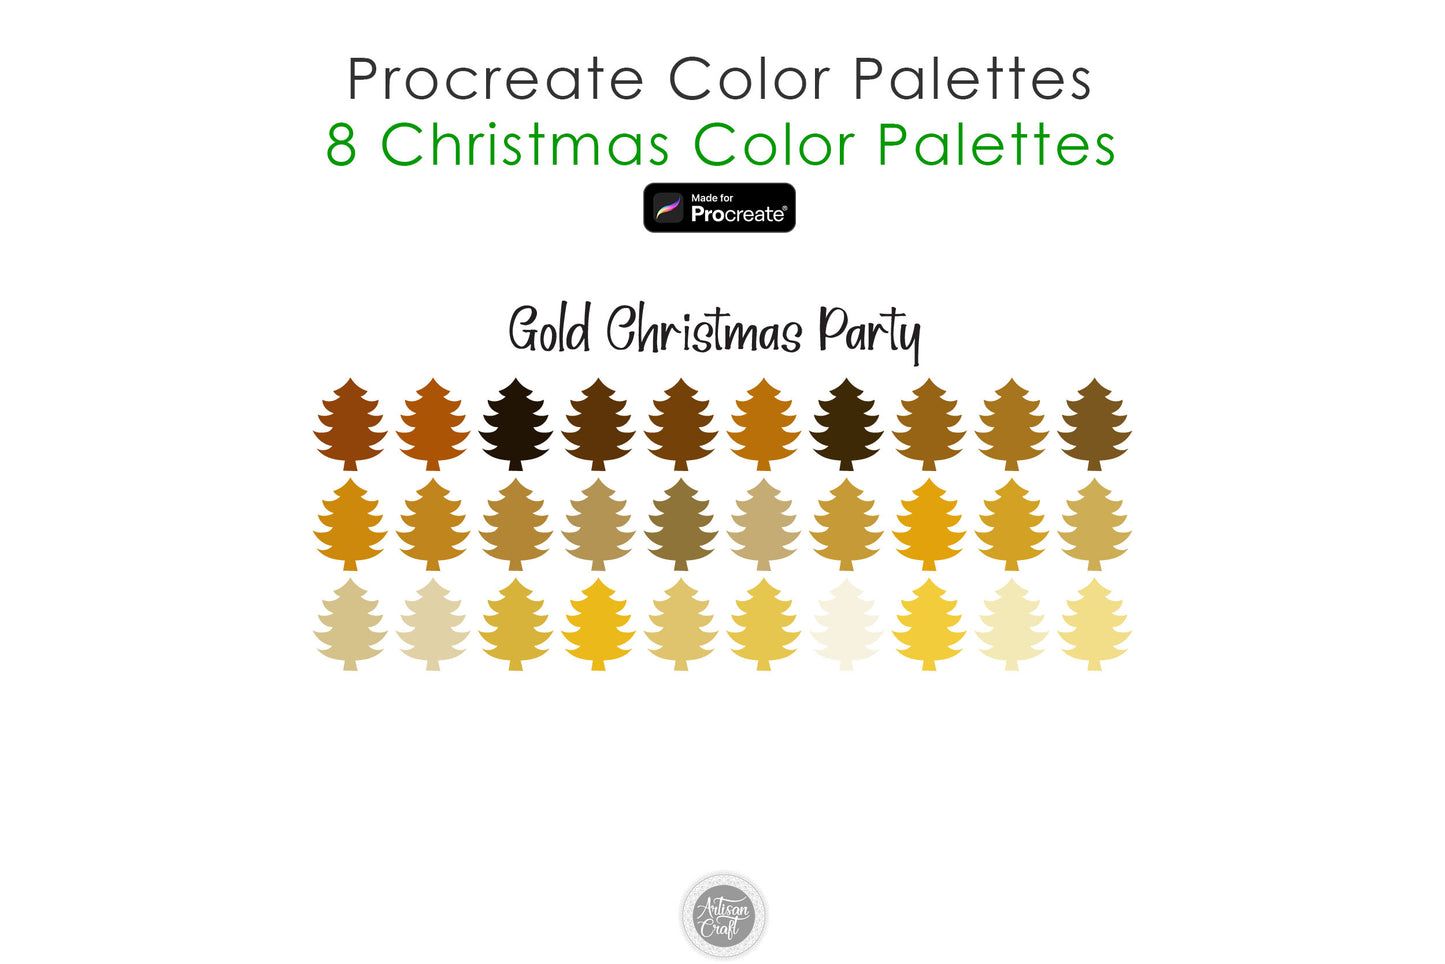 Procreate color palette for Christmas